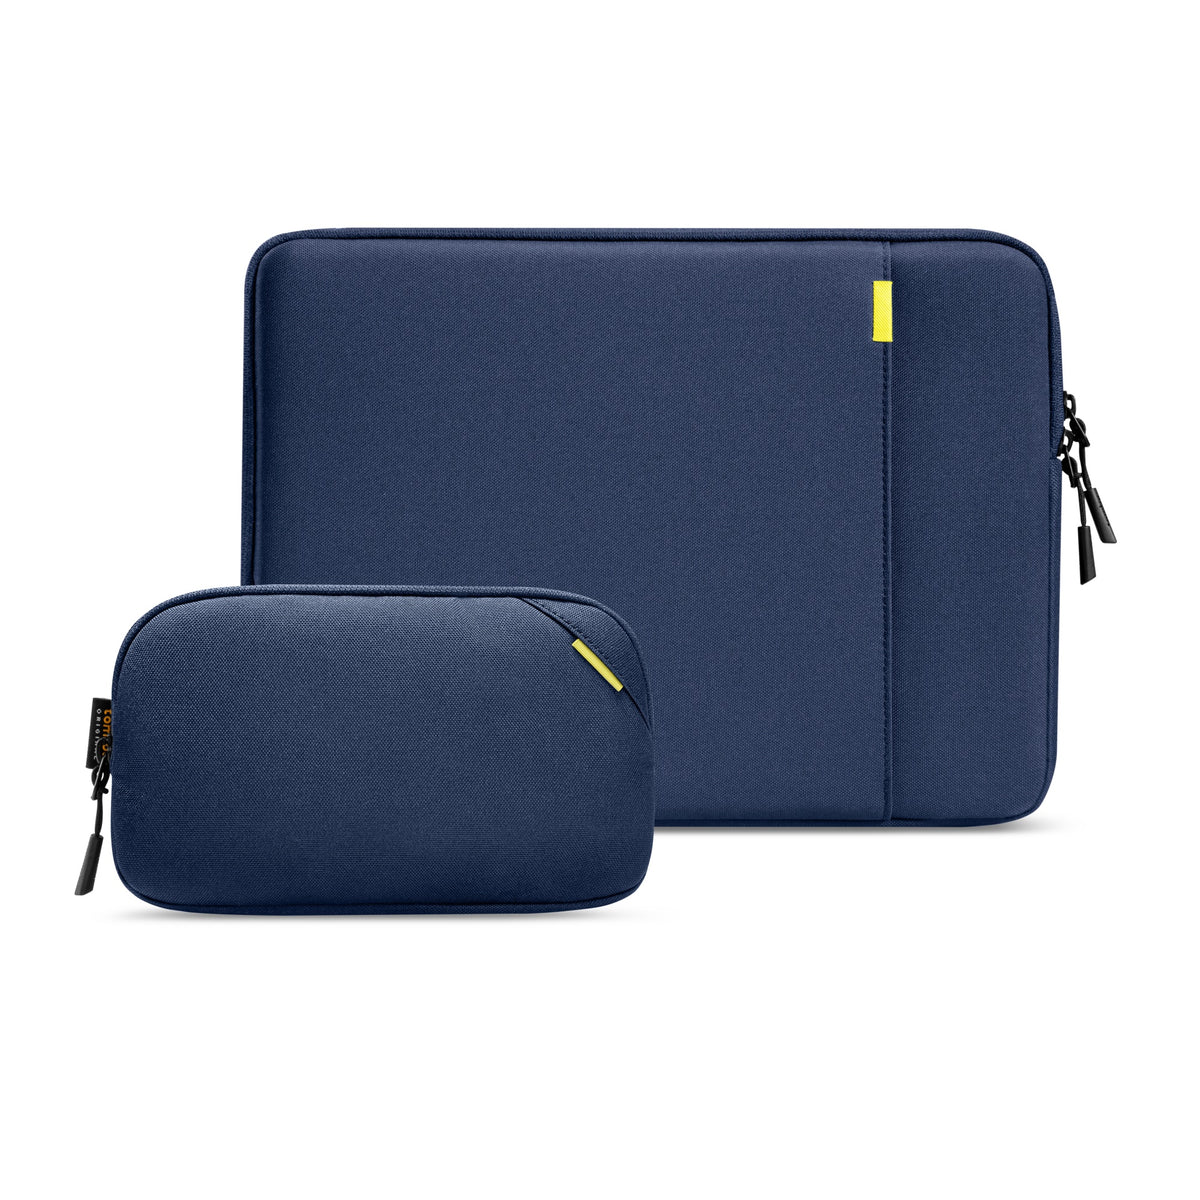 primary_Defender-A13 Laptop Sleeve Kit For 13-inch New MacBook Pro | Navy Blue